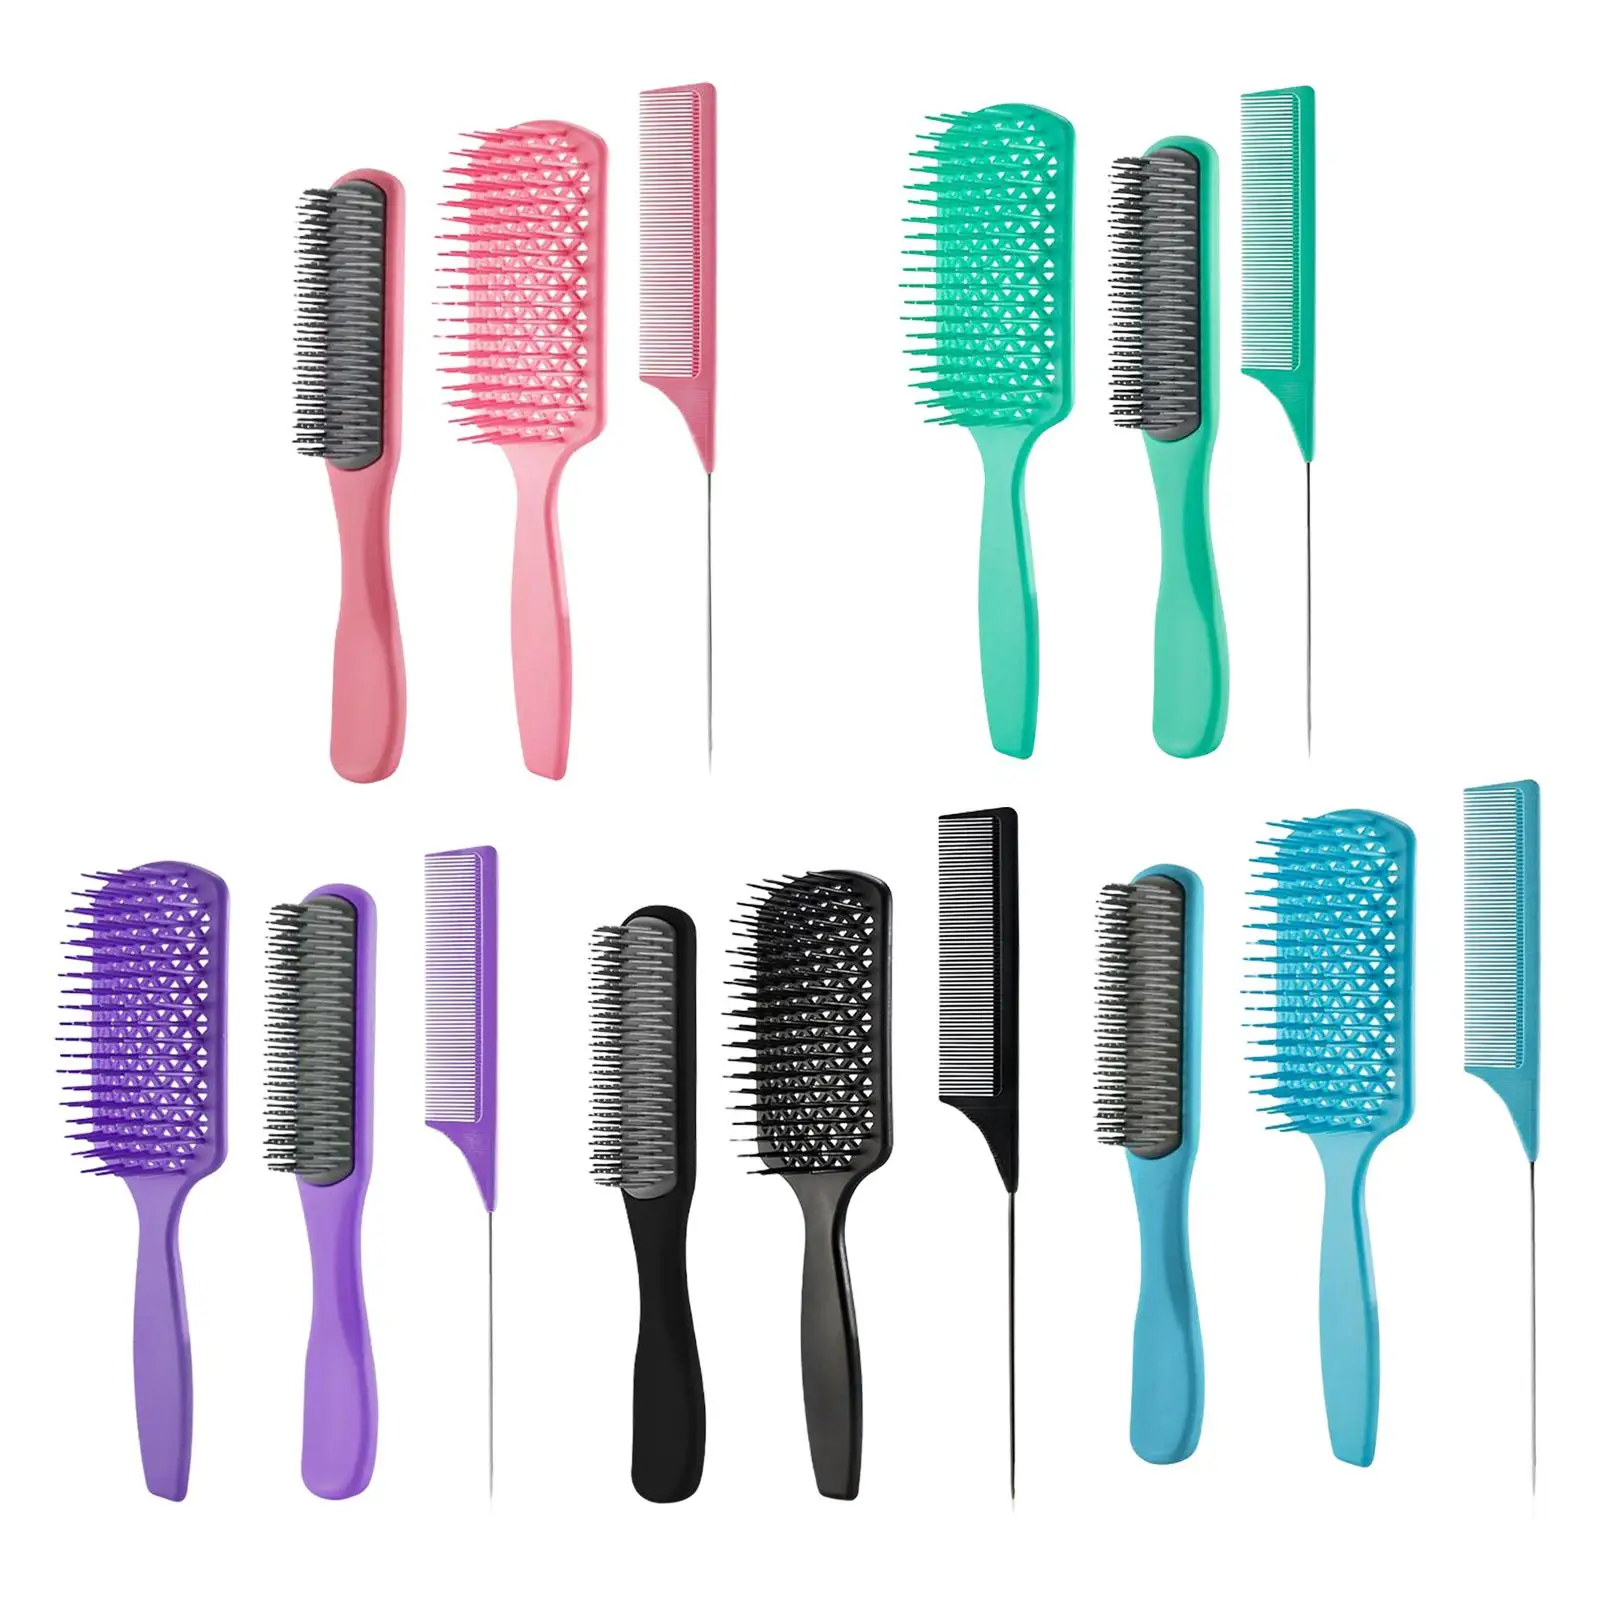 3x Hair Comb Set Smooth Handle 3 in 1 for Long Women Men and Kids